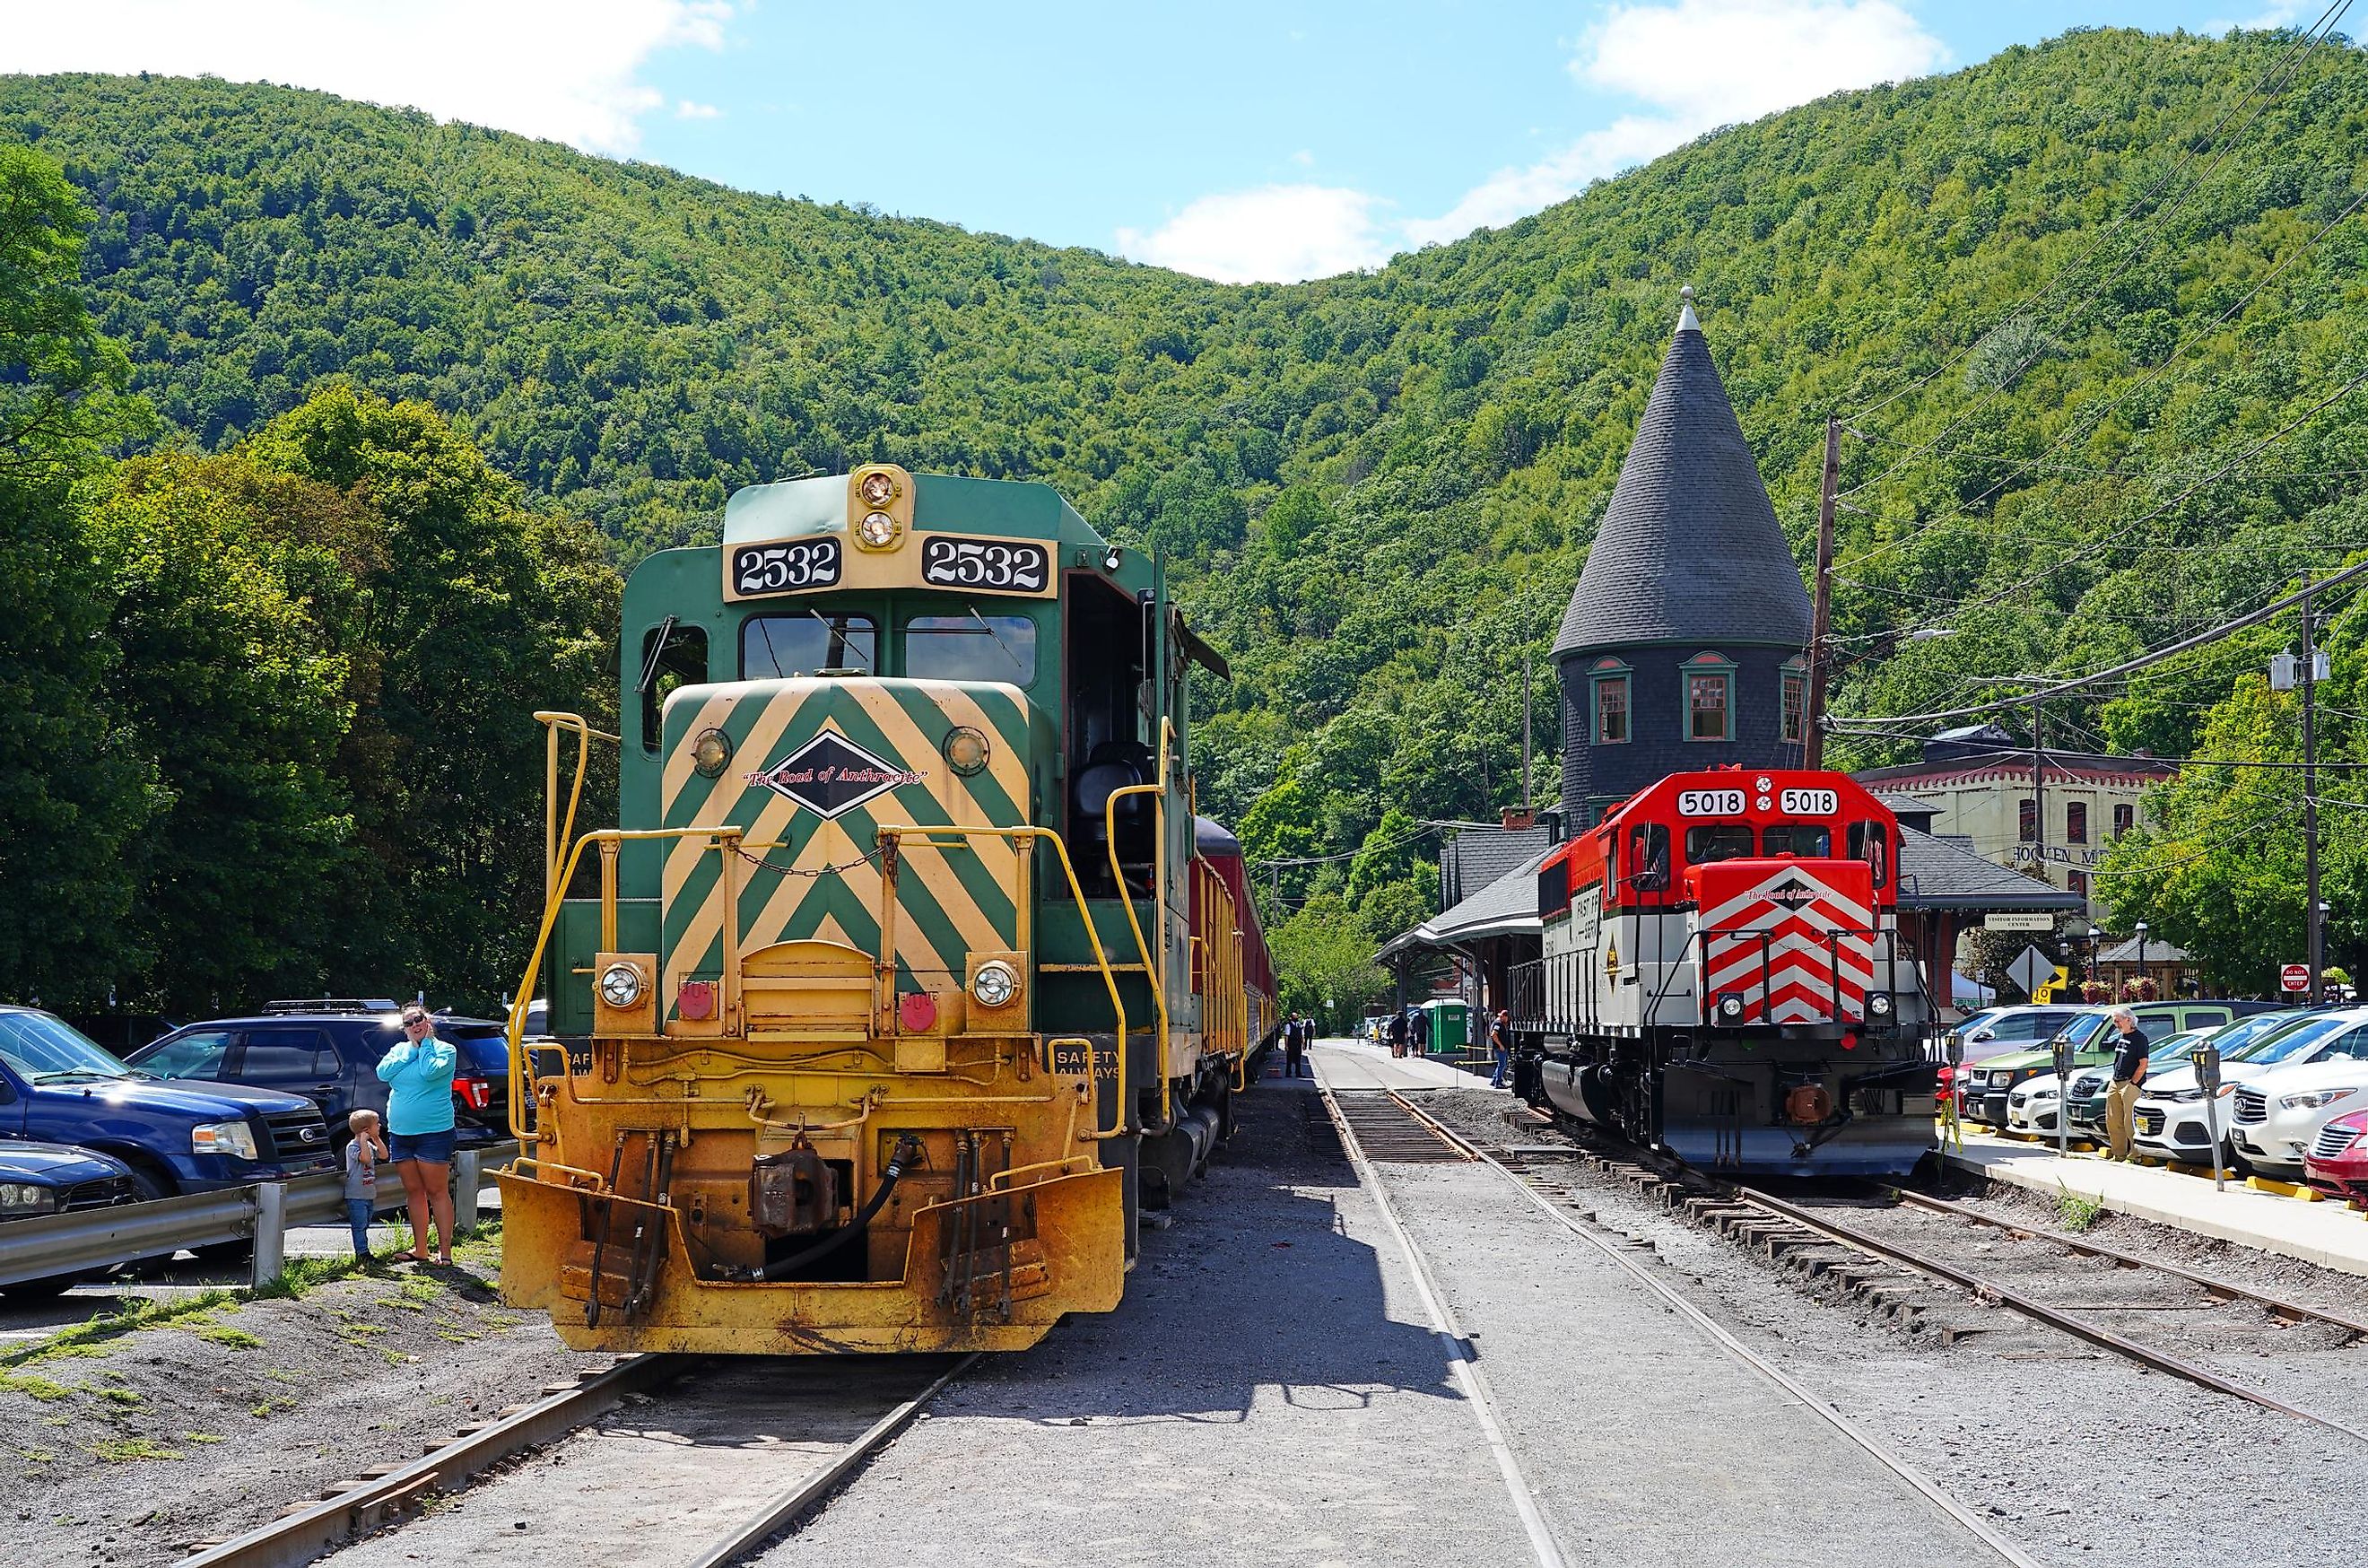 view of the historic Lehigh Gorge Scenic Railway of Reading & Northern Railroad in Jim Thorpe, Carbon County, Pennsylvania, United States.